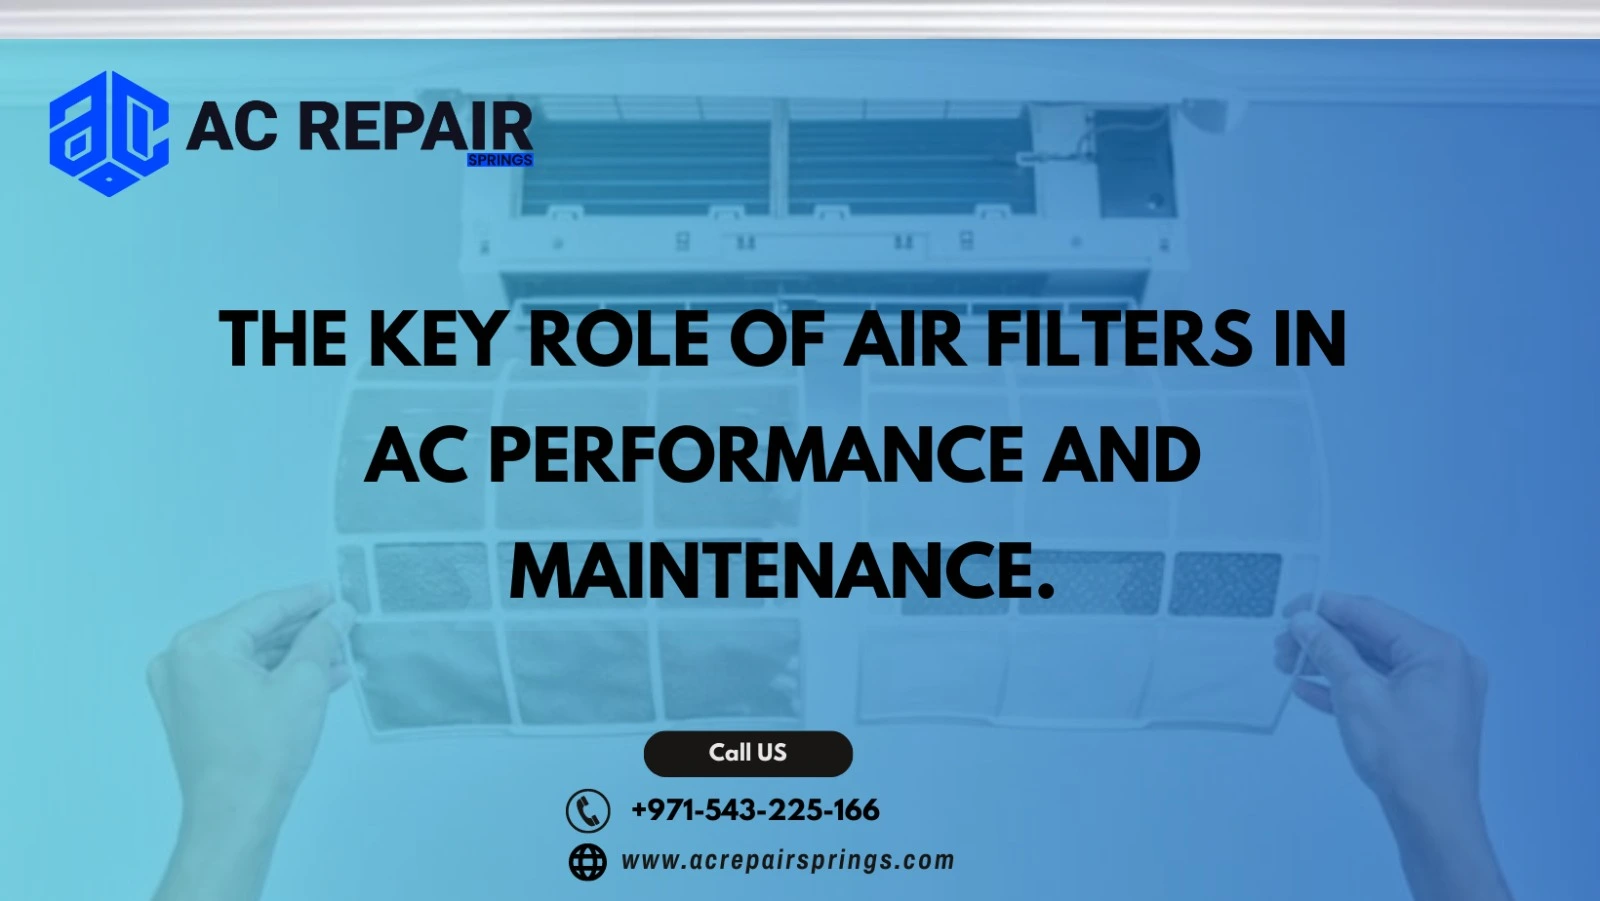 The Key Role of air filters in AC Performance and Maintenance